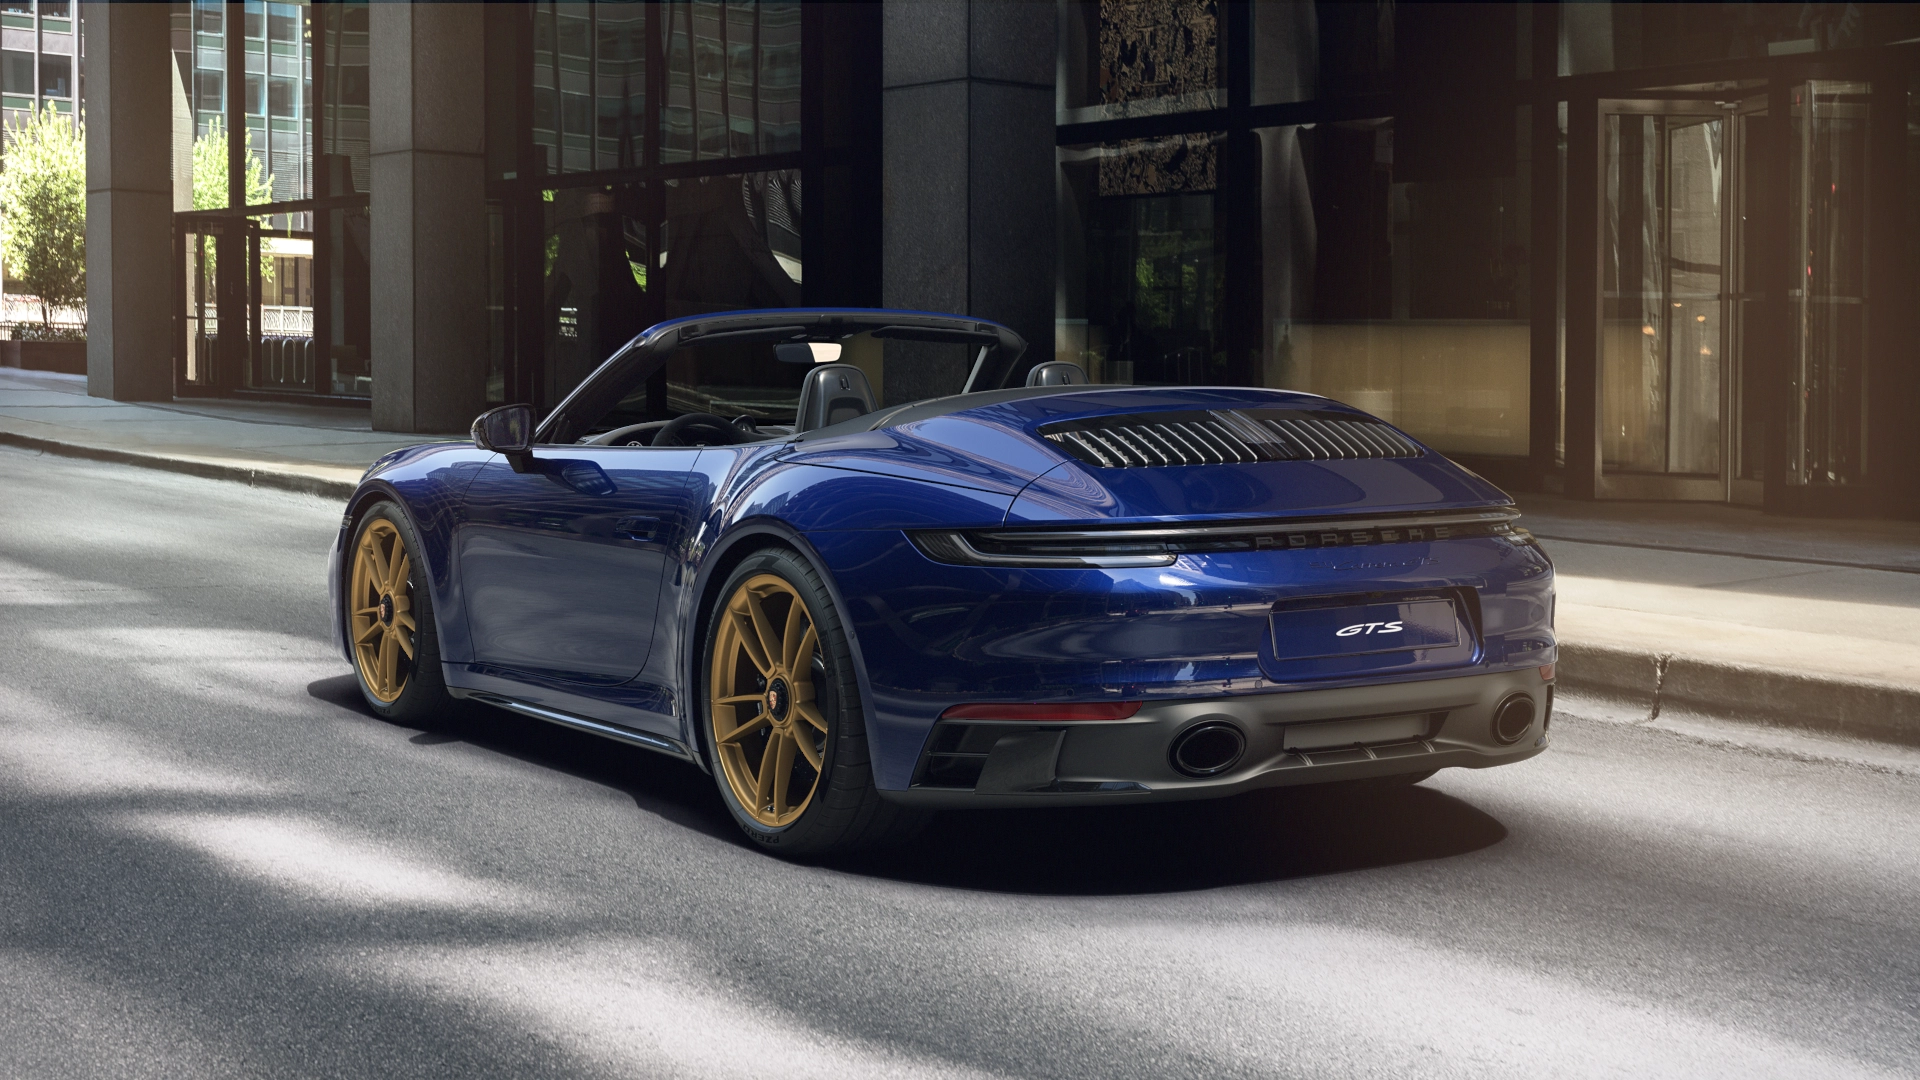 911 Carrera GTS Cabriolet back view